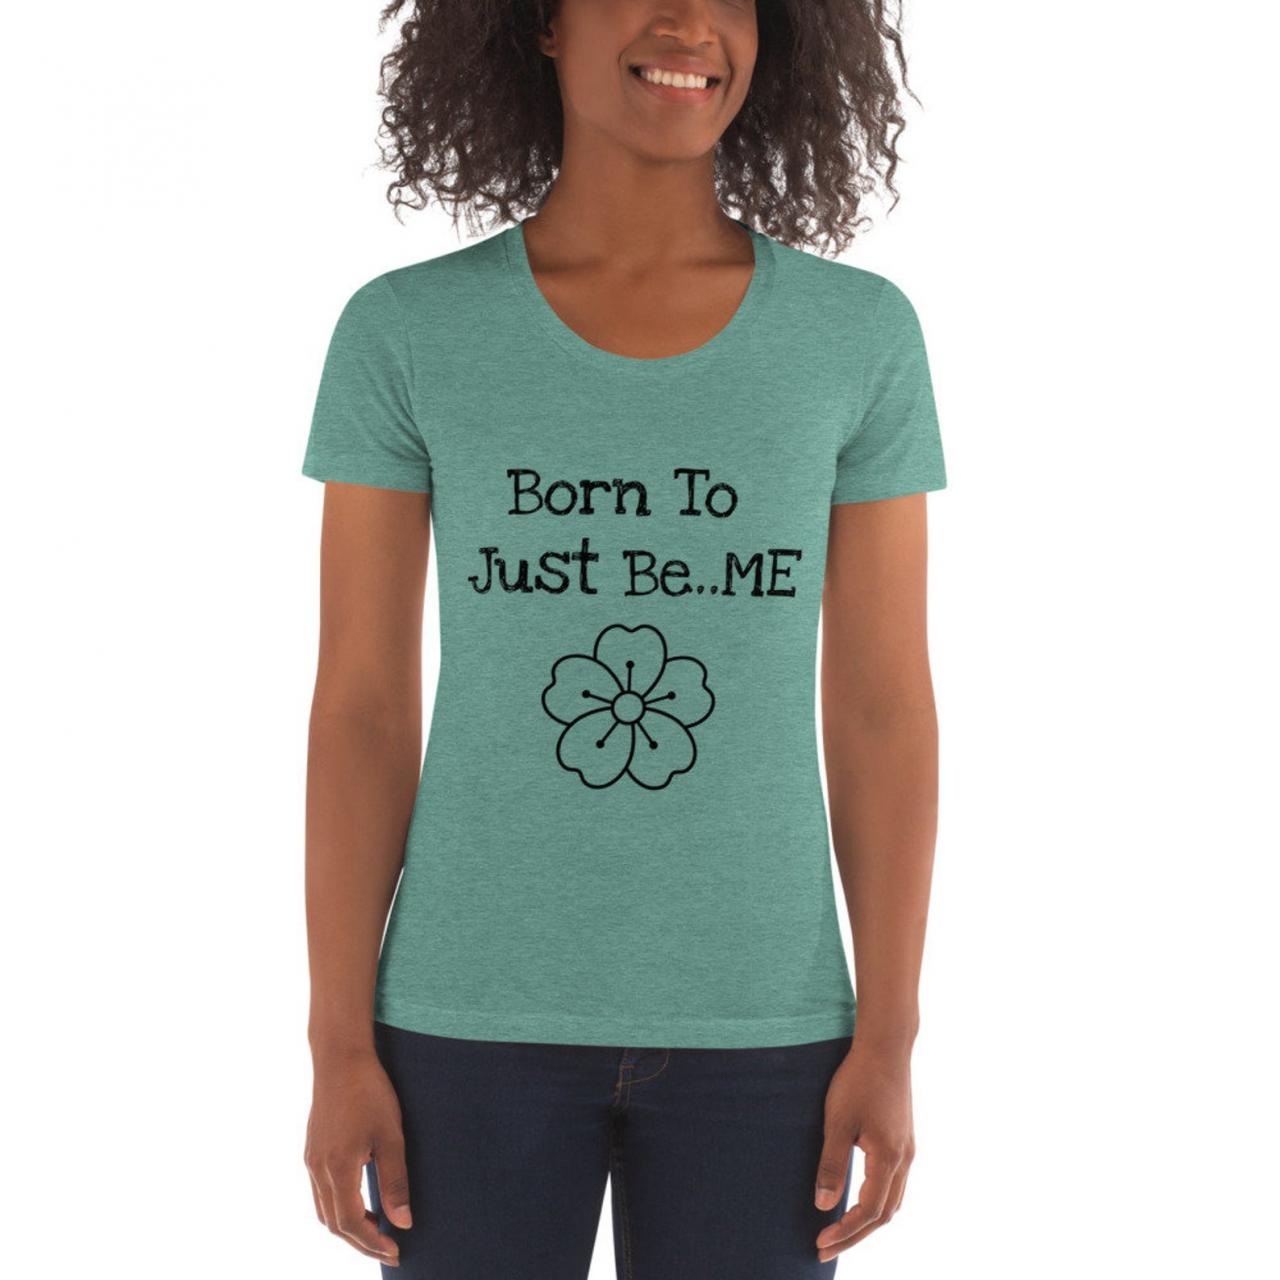 Born To Just Be Me, Gift For Her, Womens Shirt, Birthday Gift, Inspirational Shirt, Quote Shirt, Wildlower Shirt, Plant Lover Gift,